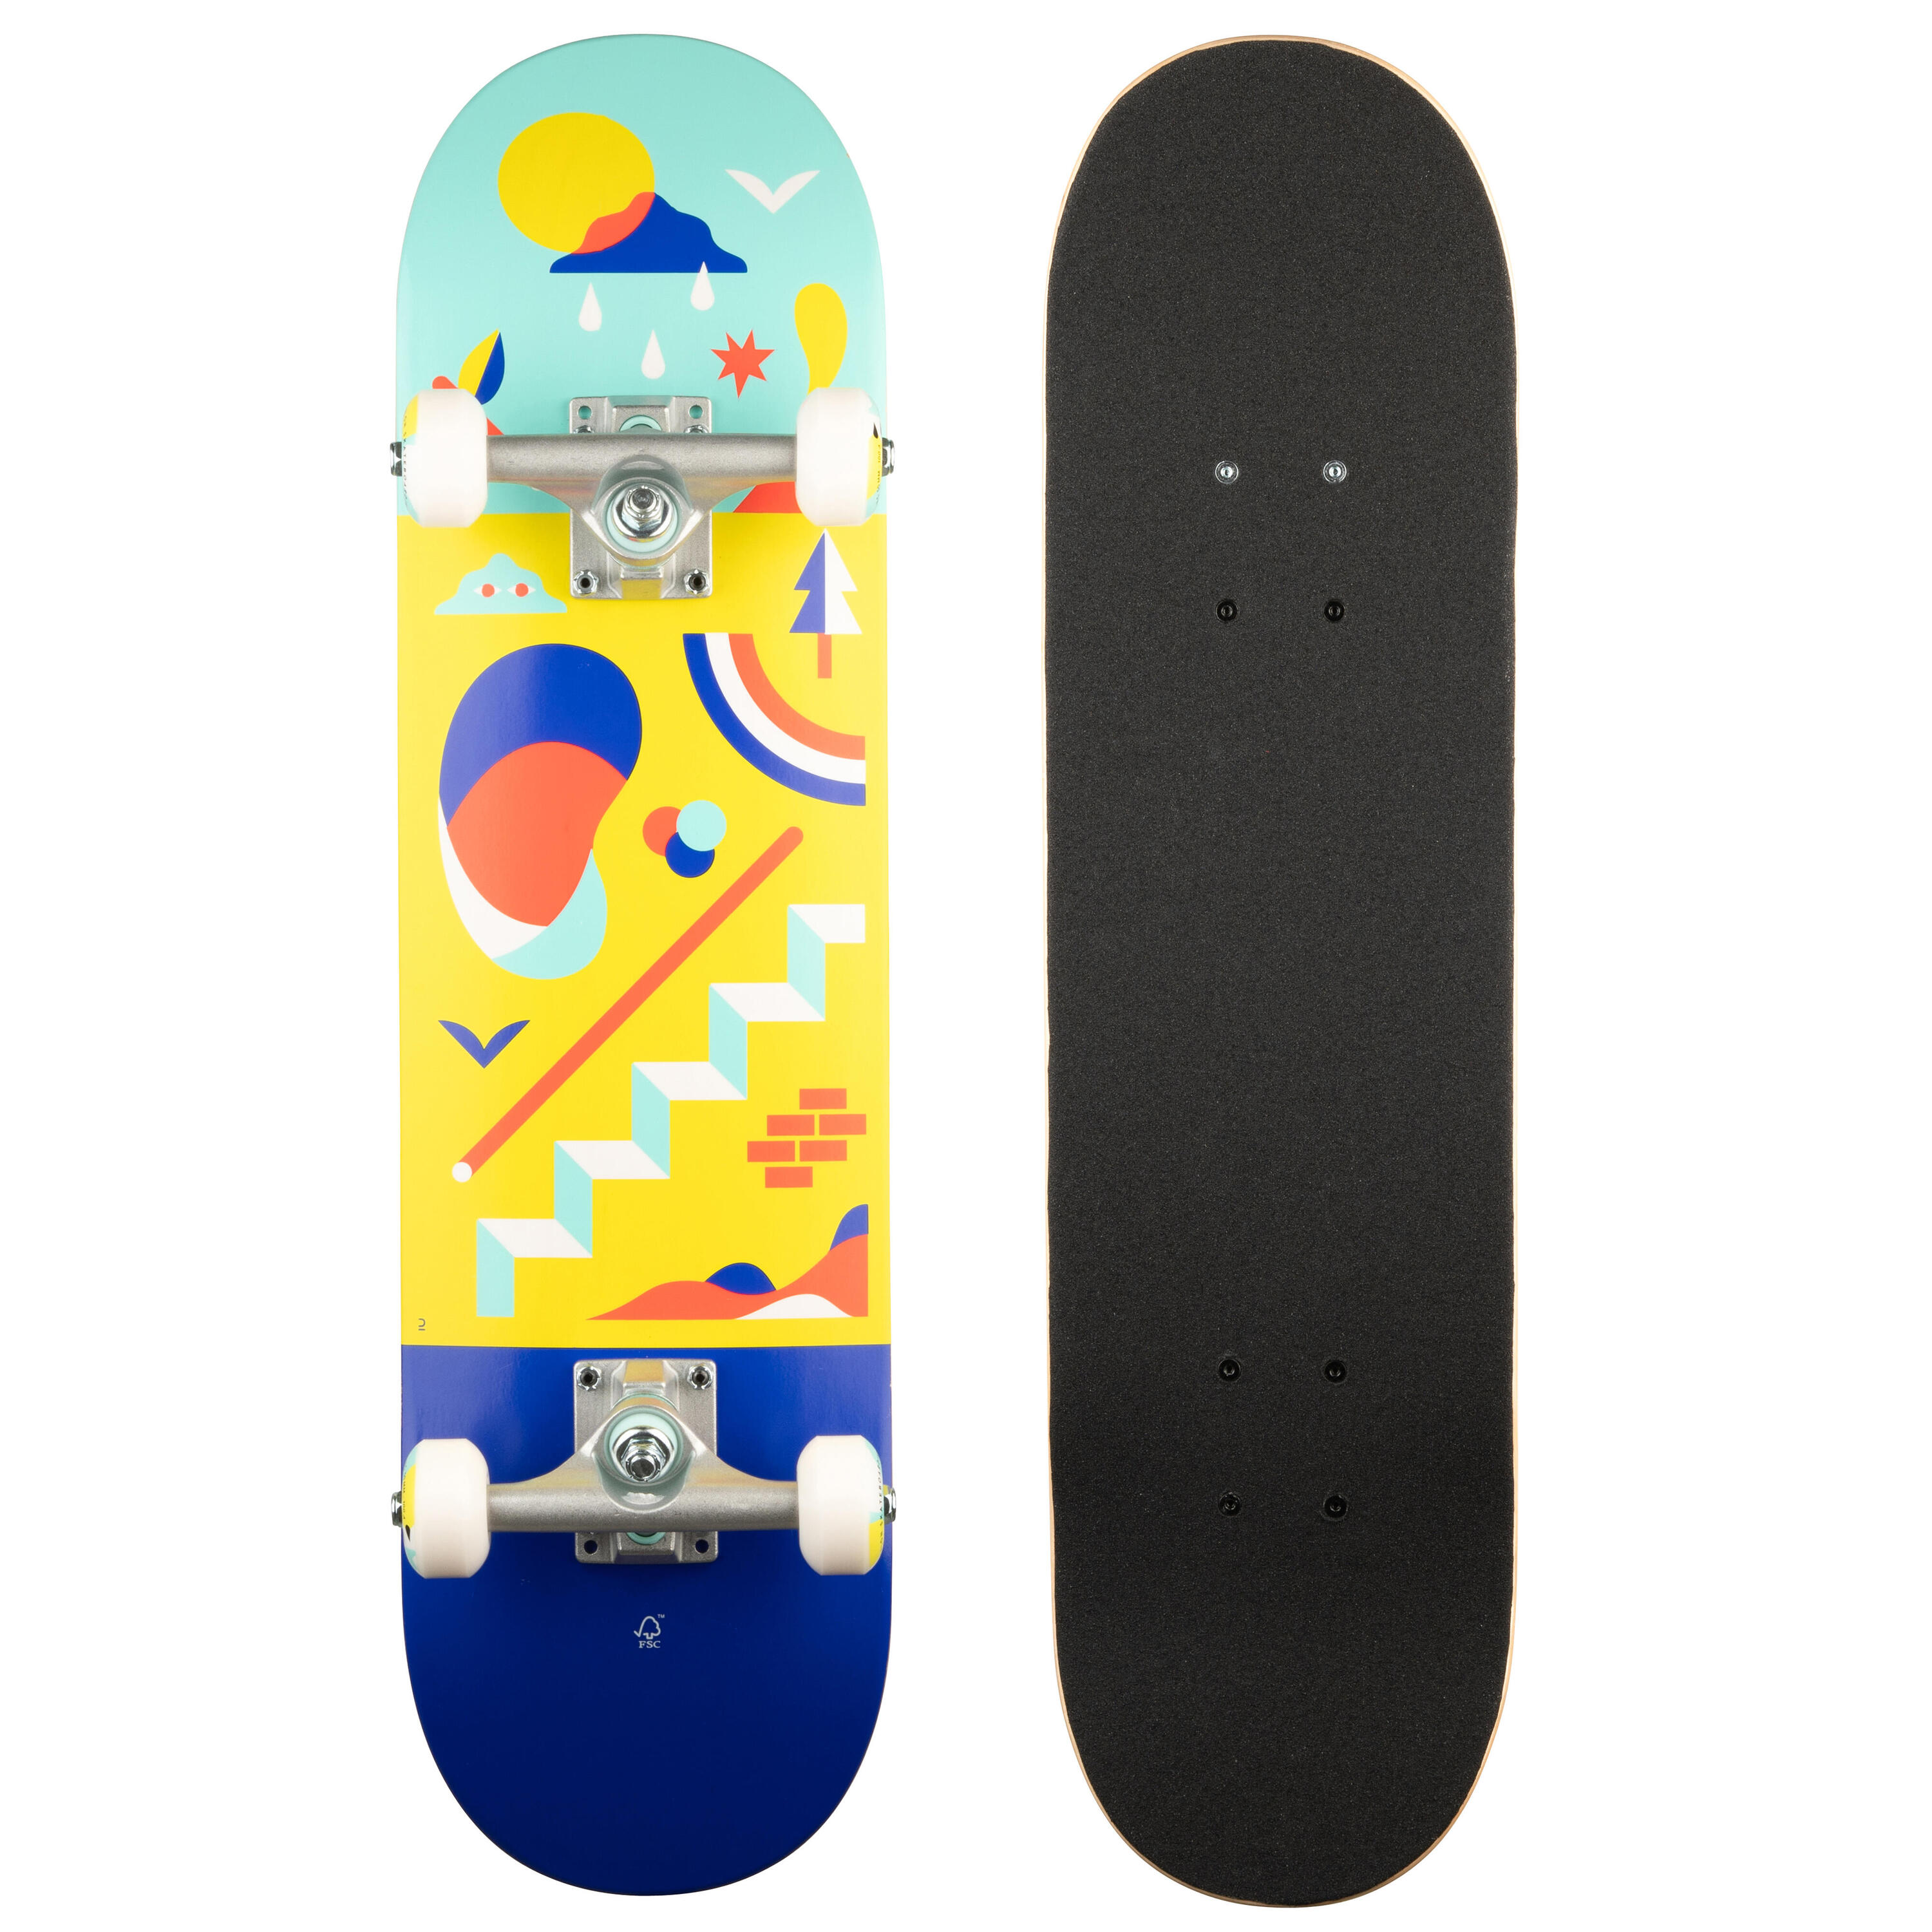 Kids' Ages 3 to 7 Years Mini Skateboard Size 7.25" CP100 - Rainbow 1/9